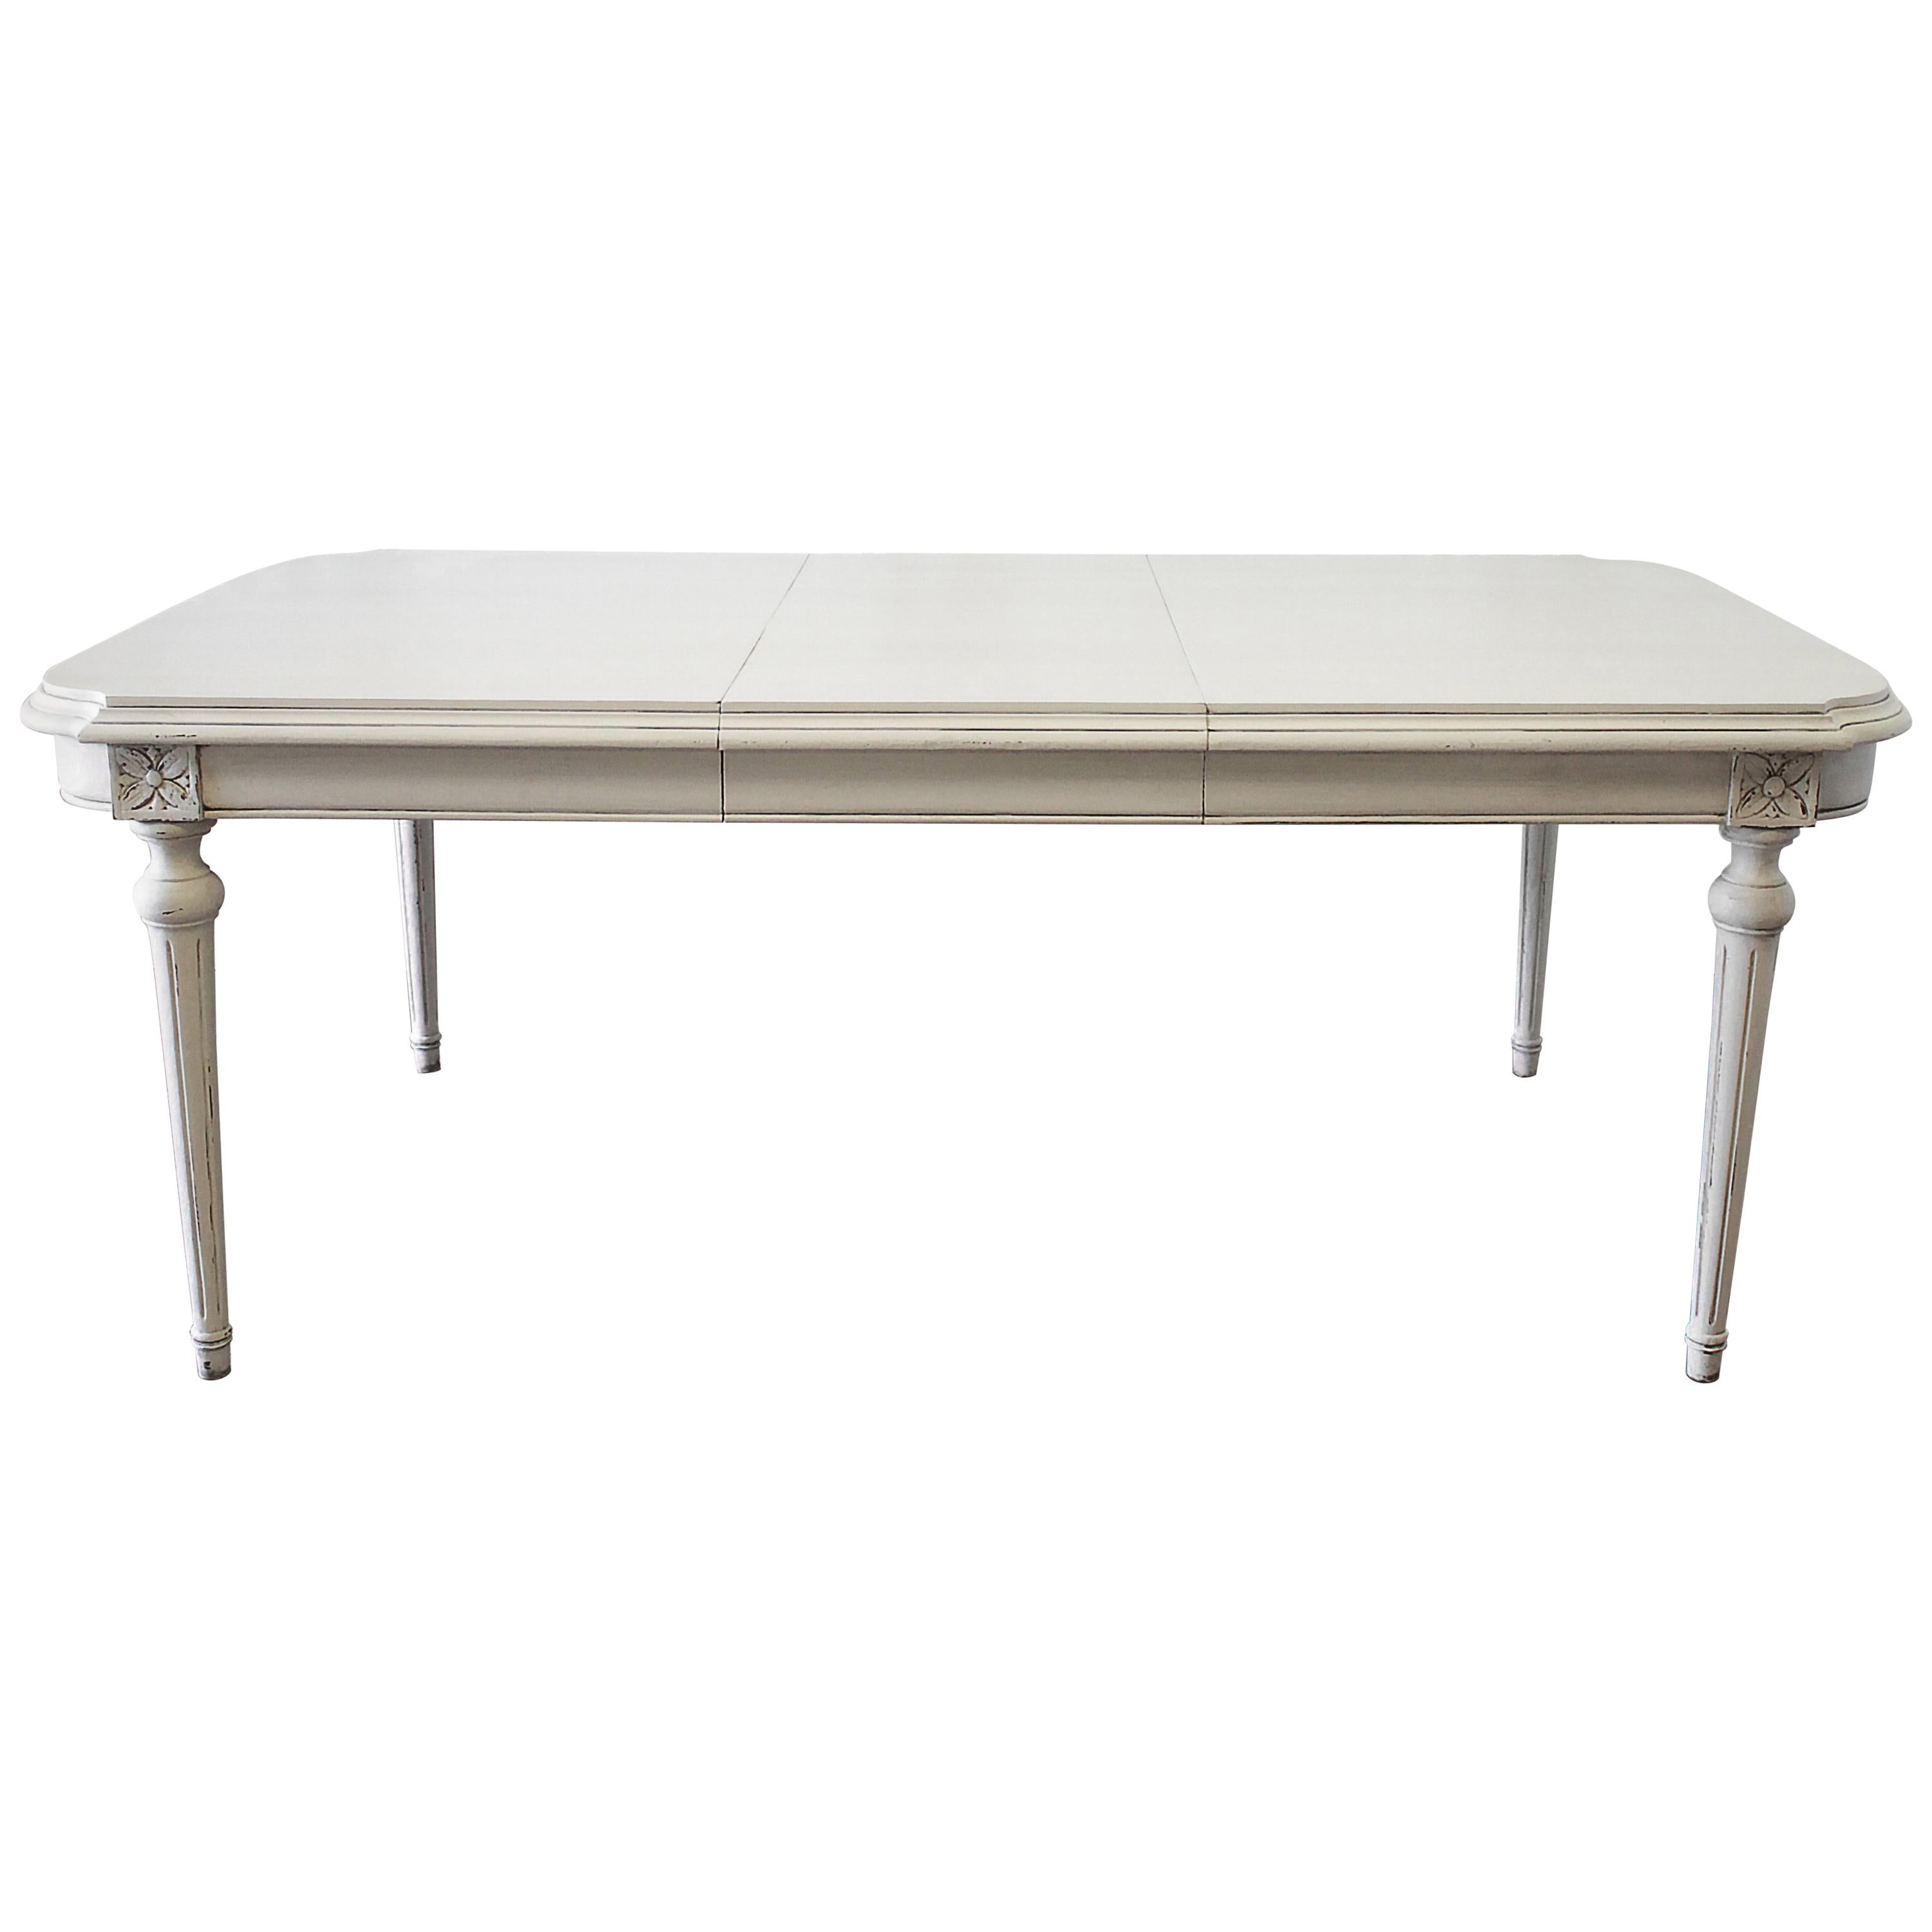 20th Century Louis XVI Style Dining Table with Leaf